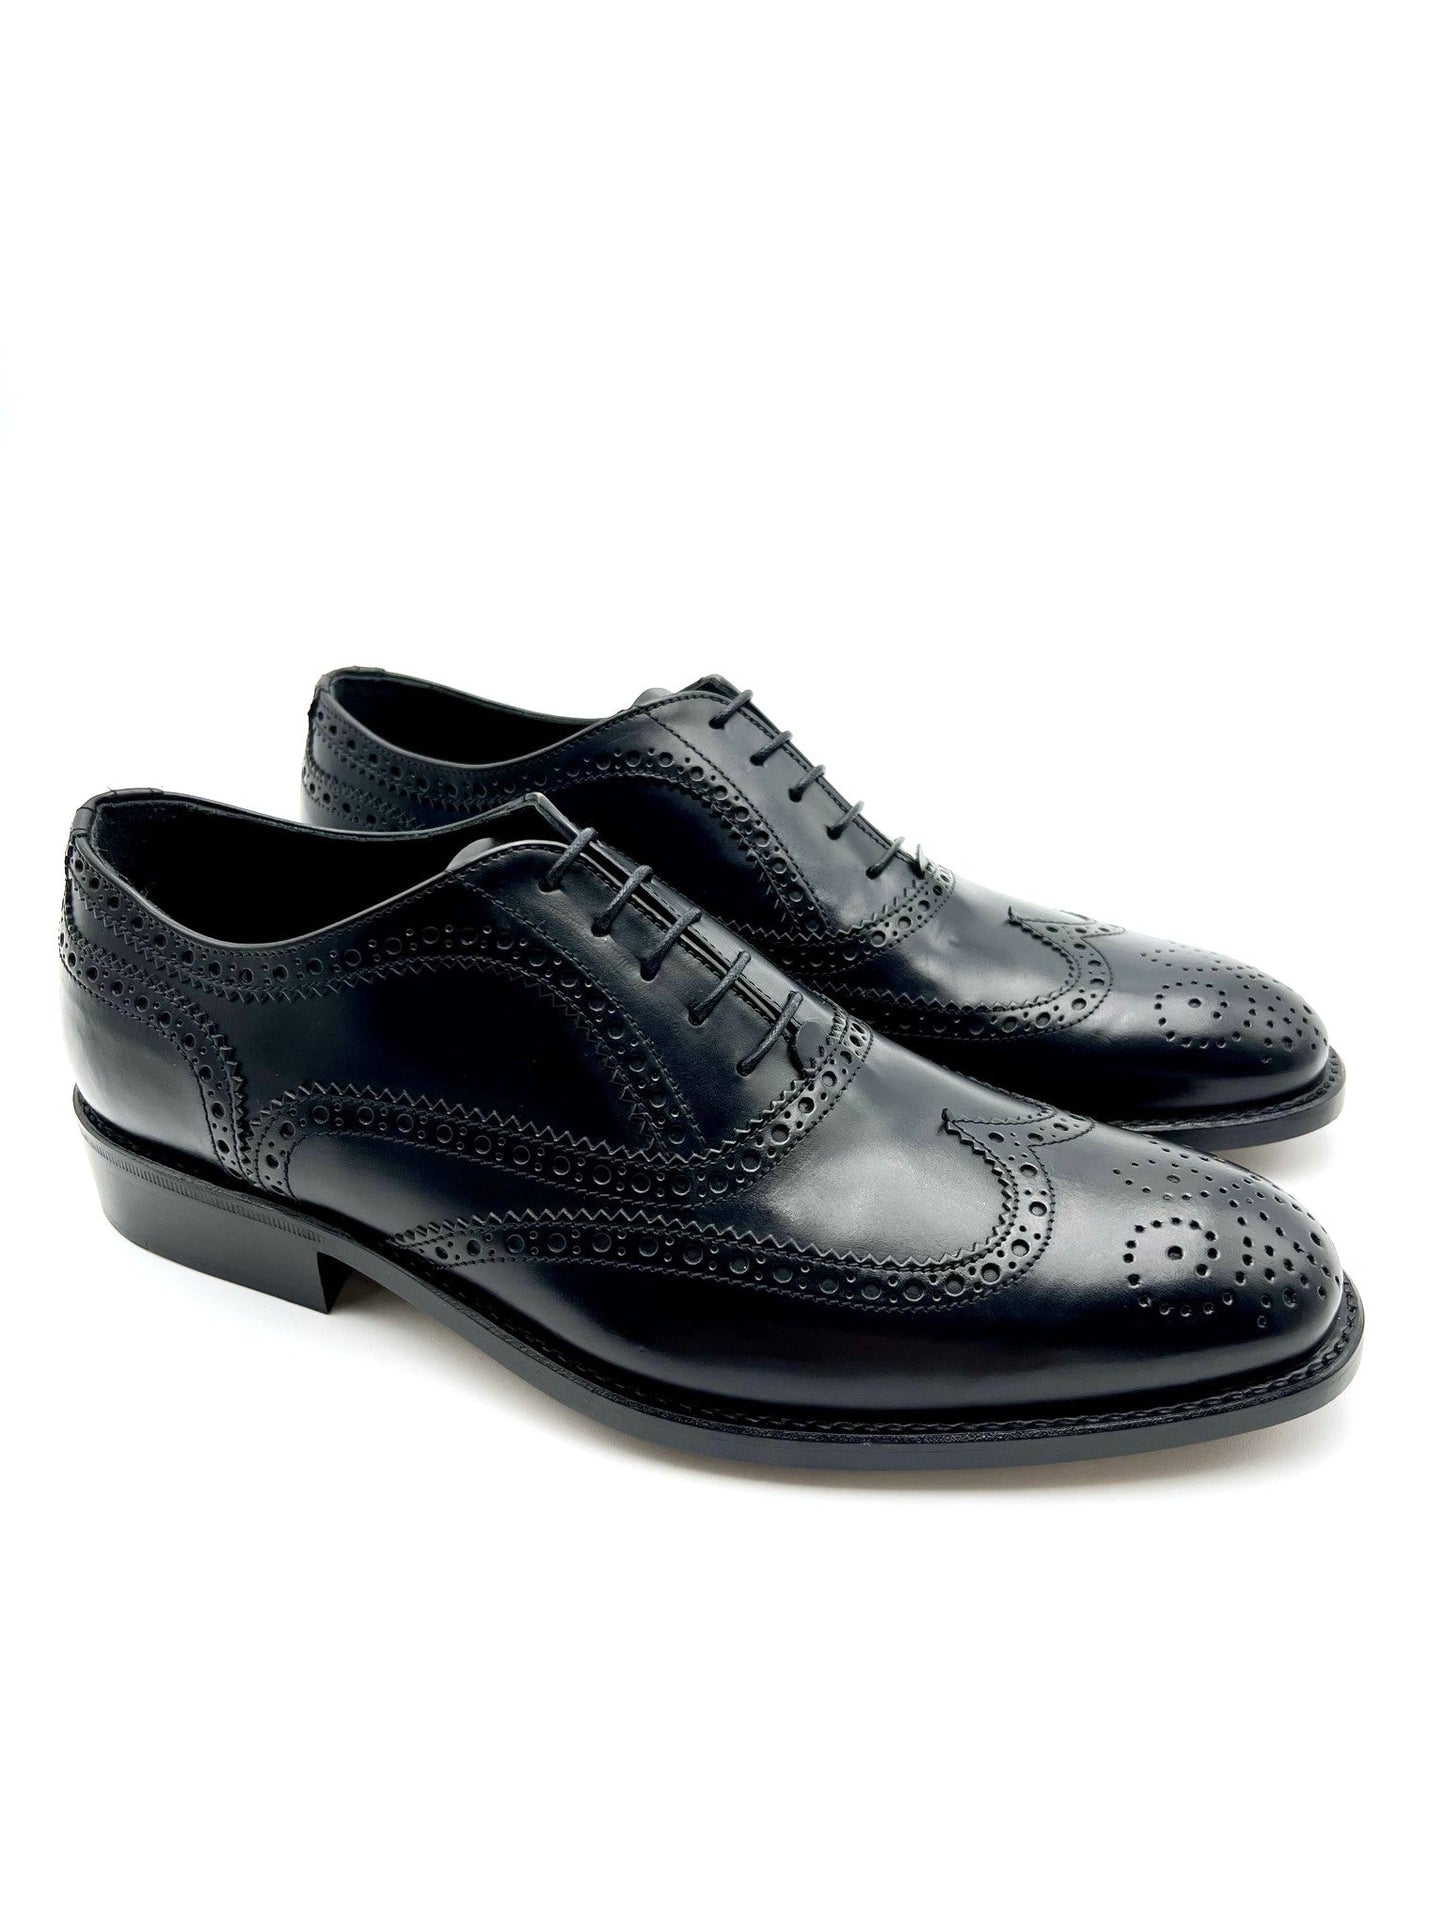 Oxford shoe in English style with dovetail hole and  flower in toe, 100% made in Italy, in genuine calfskin,  The leather sole with half rubber seedling makes it non-slip and the  seam BLAKE ensures the tightness of the bottom Process: blake- Leather: abrasive calf -  Color: black - Lining: black calf -  Bottom: leather - Insole: leather Handcrafted shoes, made in Italy with genuine 100% Italian leather.- Sartoria Dei Duchi-Atri